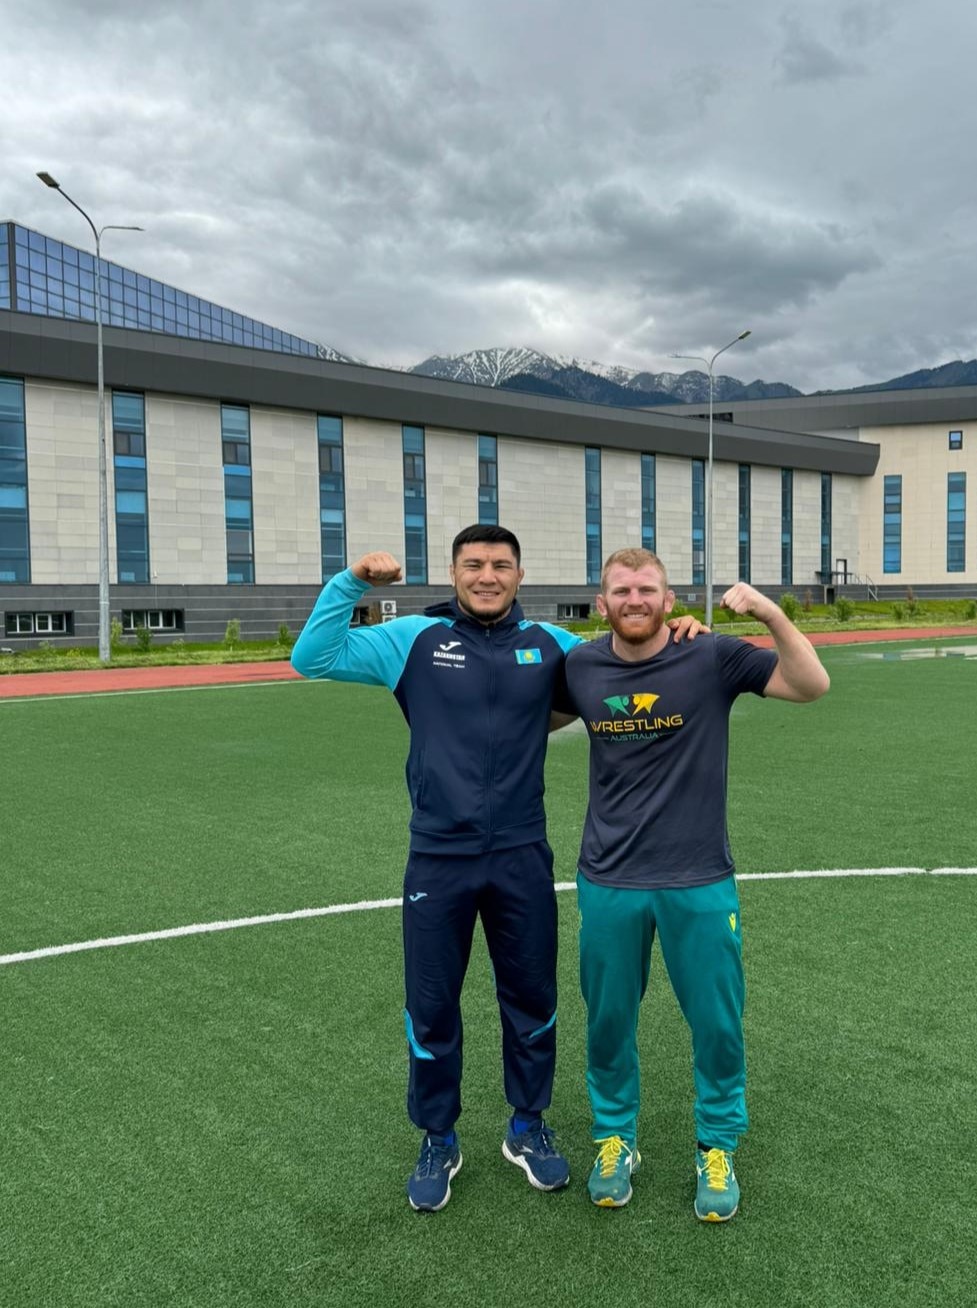 Two men stand on a soccer pitch, arm in arm, flexing their muscles. Both smile. Building and mountains behind them.